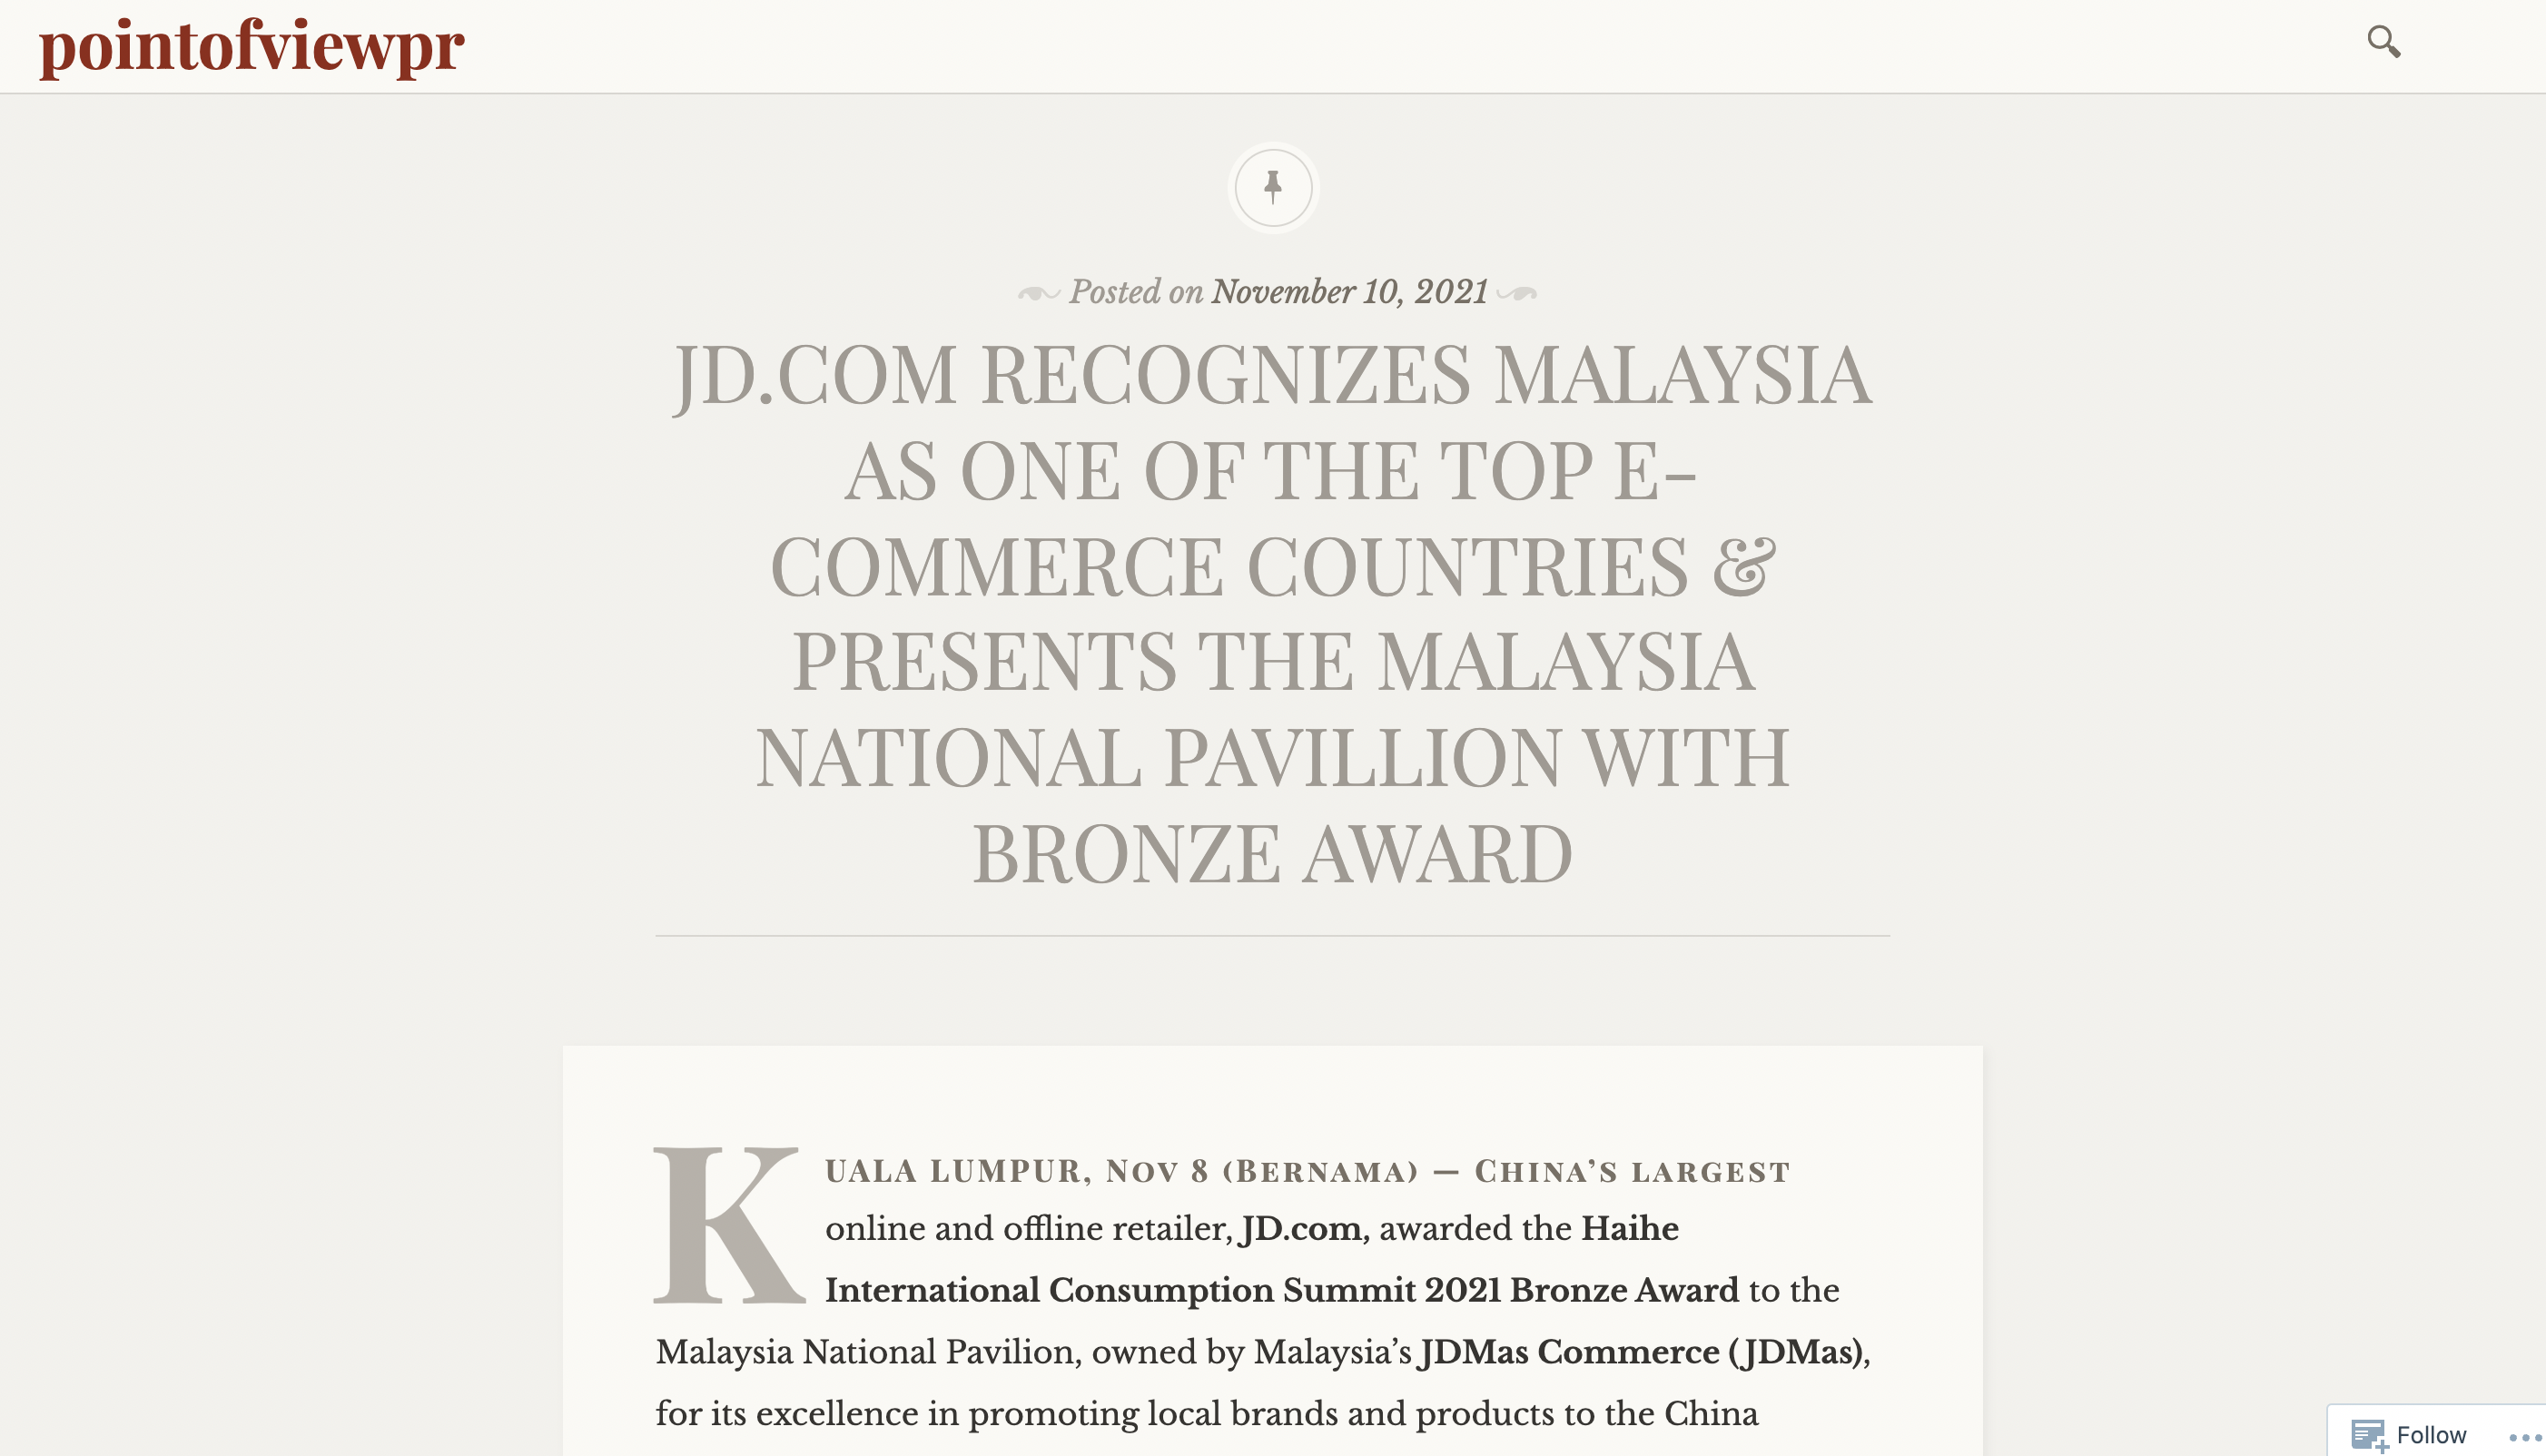 JD.com Recognizes Malaysia As One of The Top E-Commerce Countries & Presents The Malaysia National Pavillion With Bronze Award